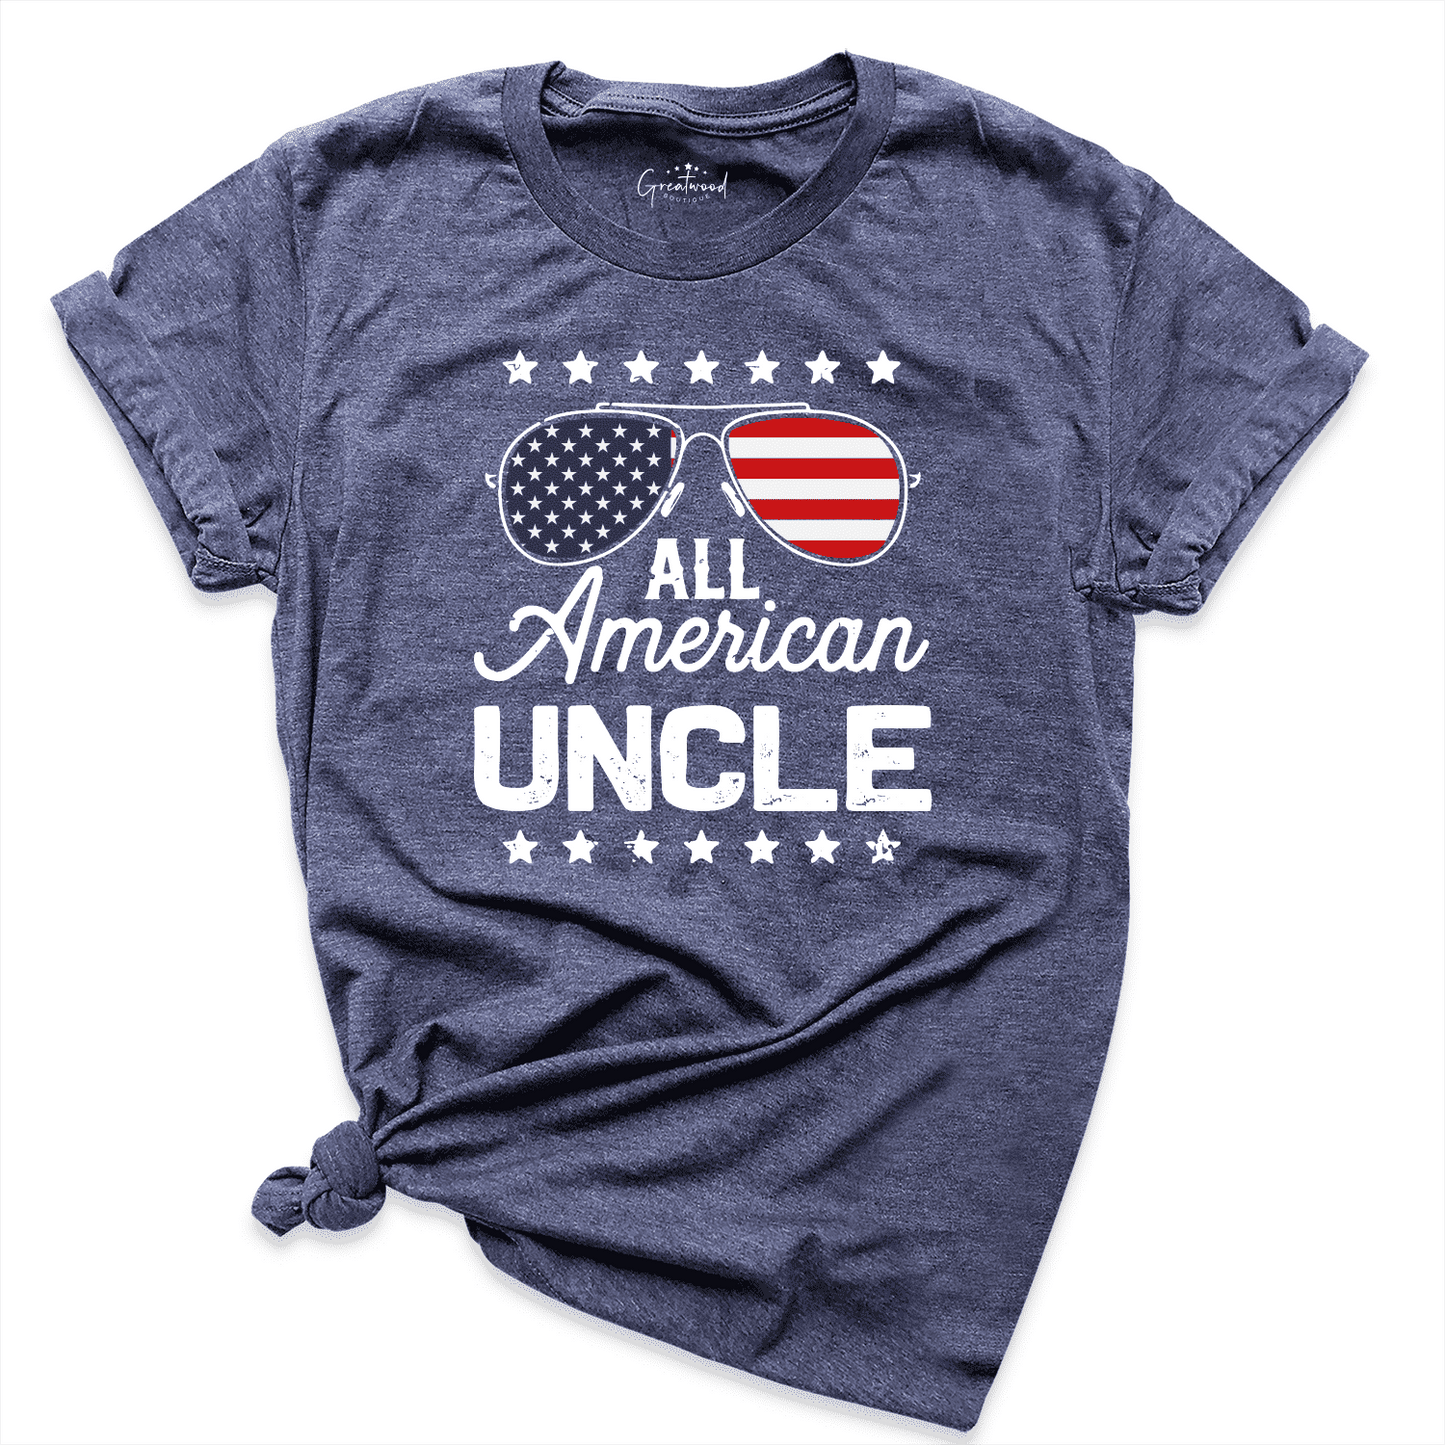 All American Uncle Shirt Navy - Greatwood Boutique